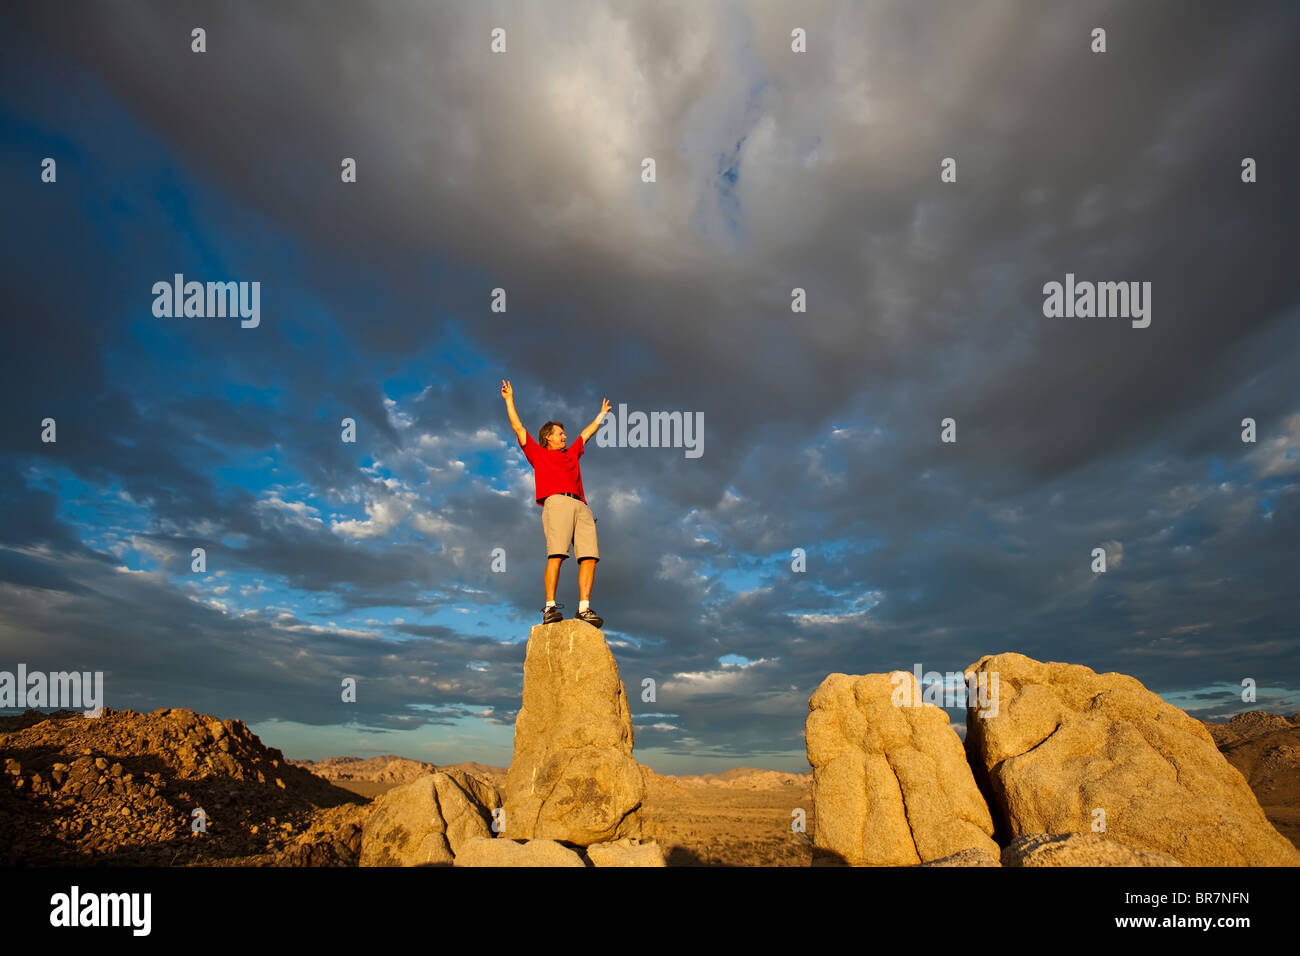 Rock climber leaps across a gap  on the summit of a pinnacle after a successful ascent as storm clouds build in the setting sun. Stock Photo